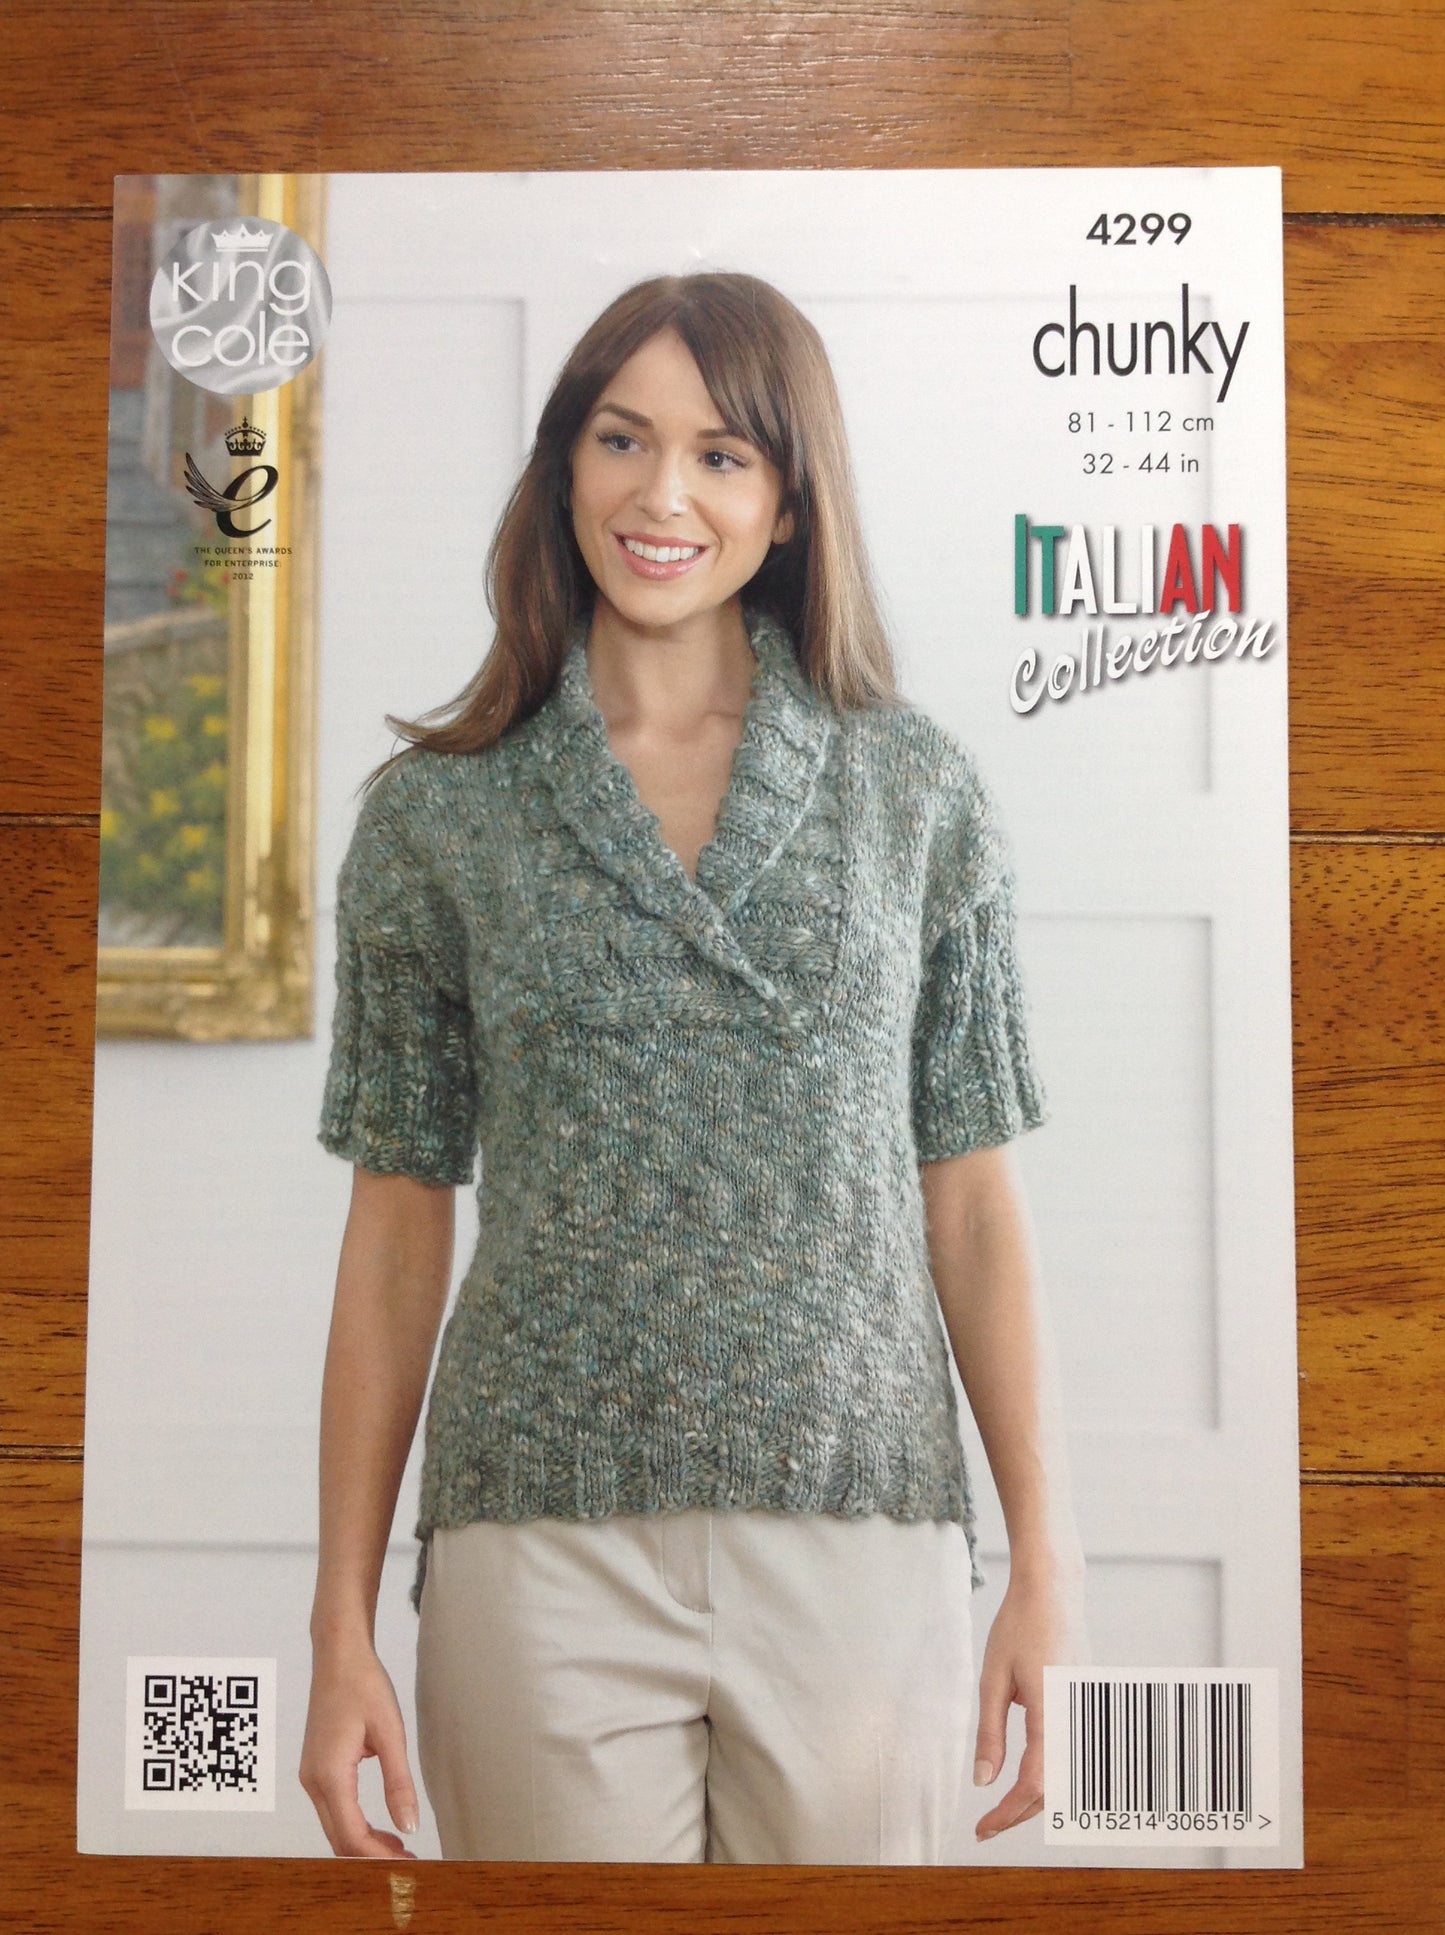 4299 King Cole Italian Collection Verona chunky jacket and top knitting pattern